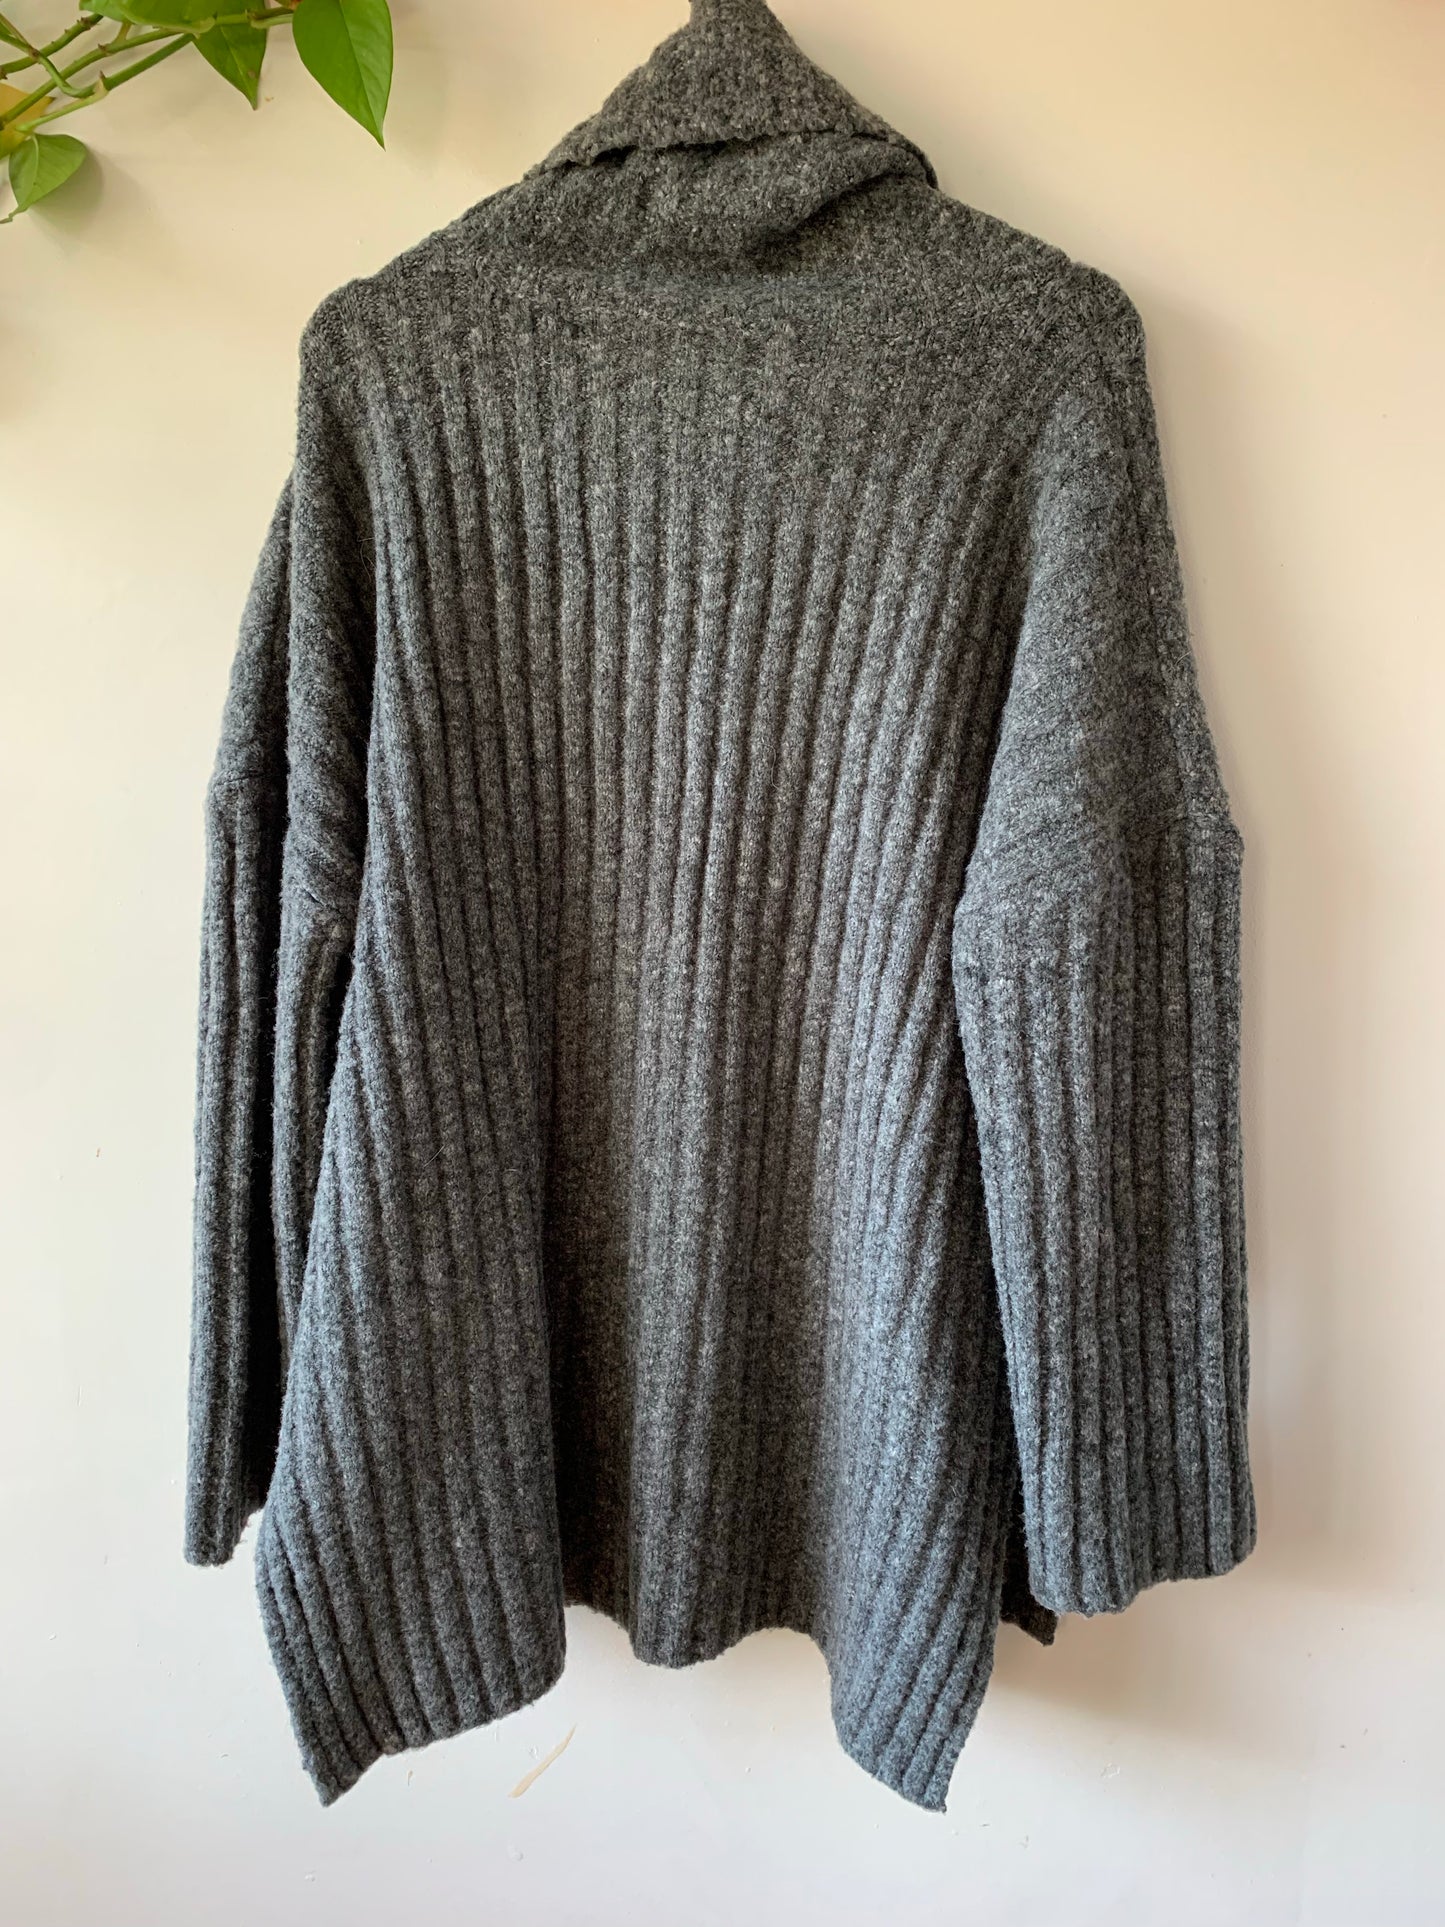 French Connection Gray Turtleneck Pullover Sweater, Size Medium